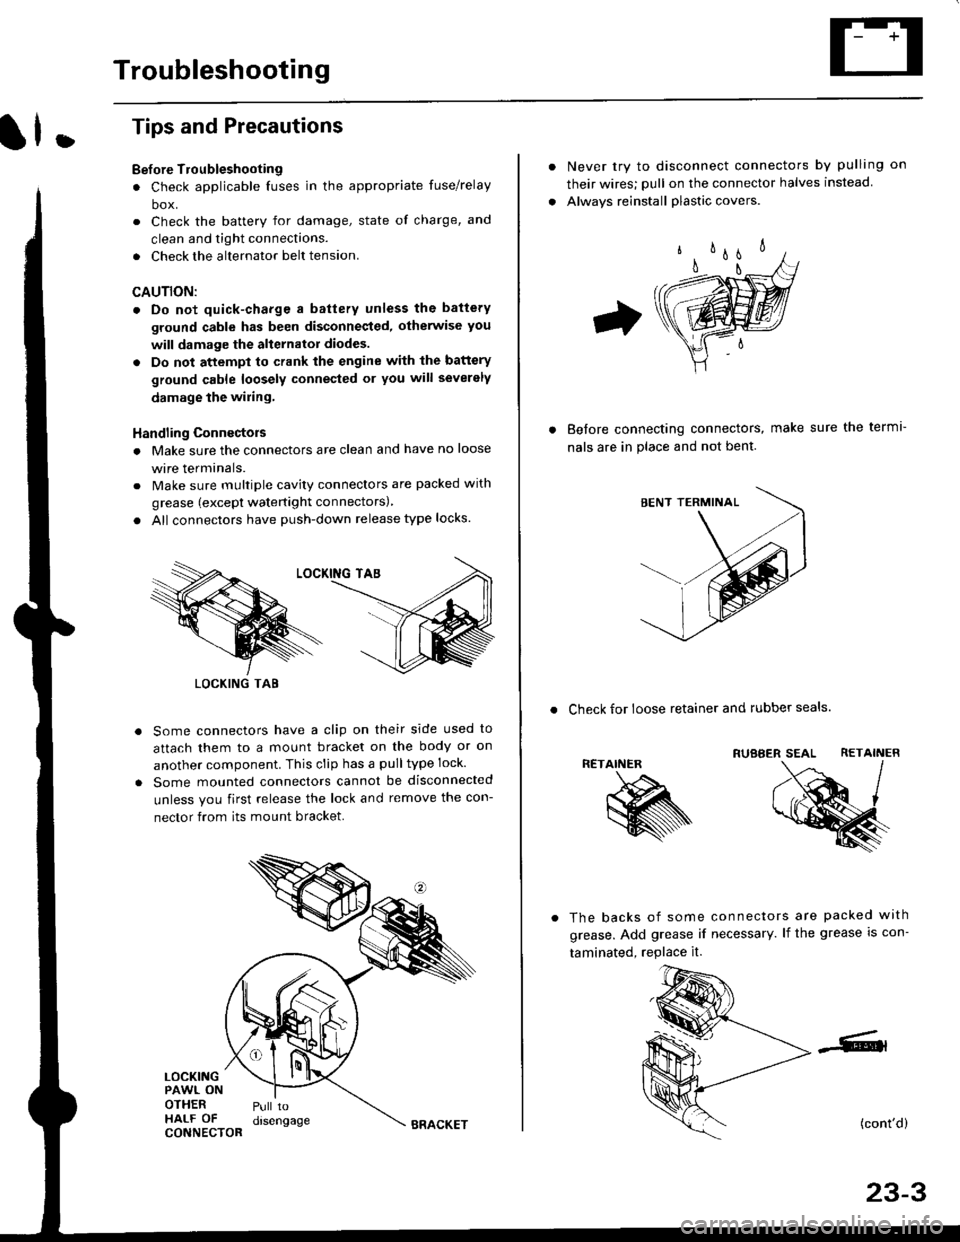 HONDA CIVIC 2000 6.G Workshop Manual Troubleshooting
ll.
Tips and Precautions
Bef ore Troubleshooting
. Check applicable fuses in the appropriate fuse/relay
box.
. Check the battery for damage, state of charge, and
clean and tight connec